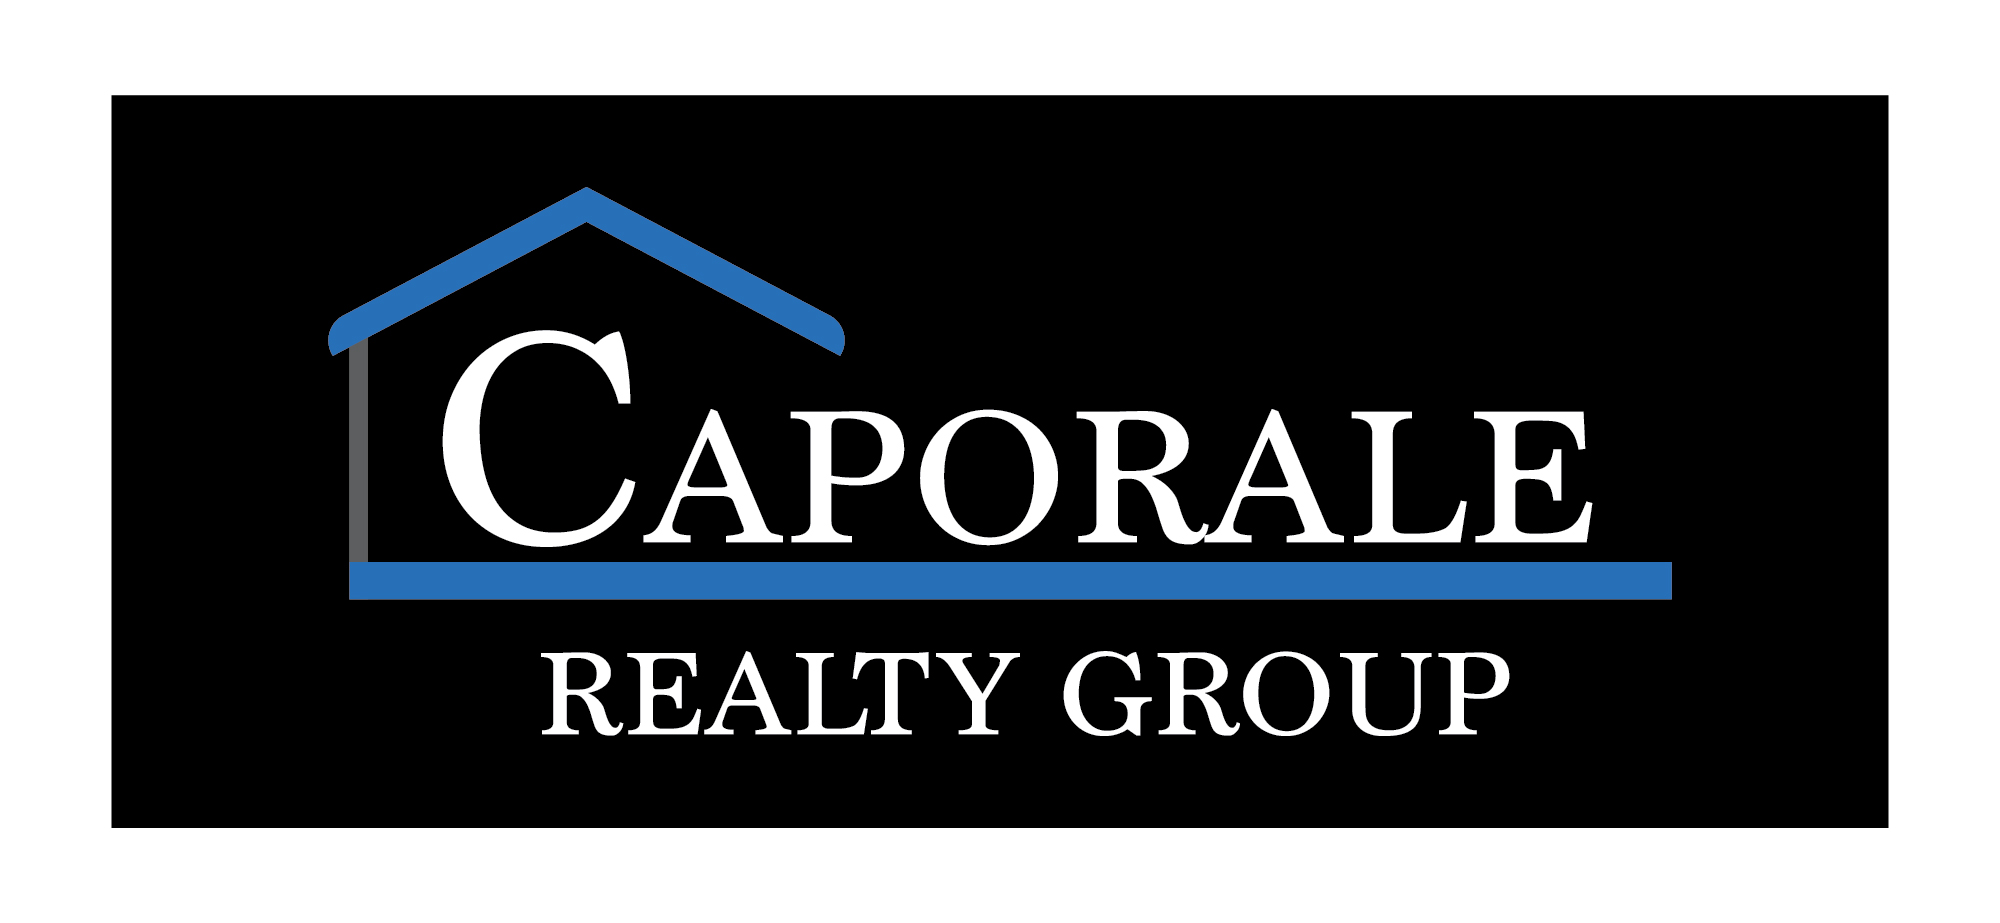 Caporale Realty Group Logo